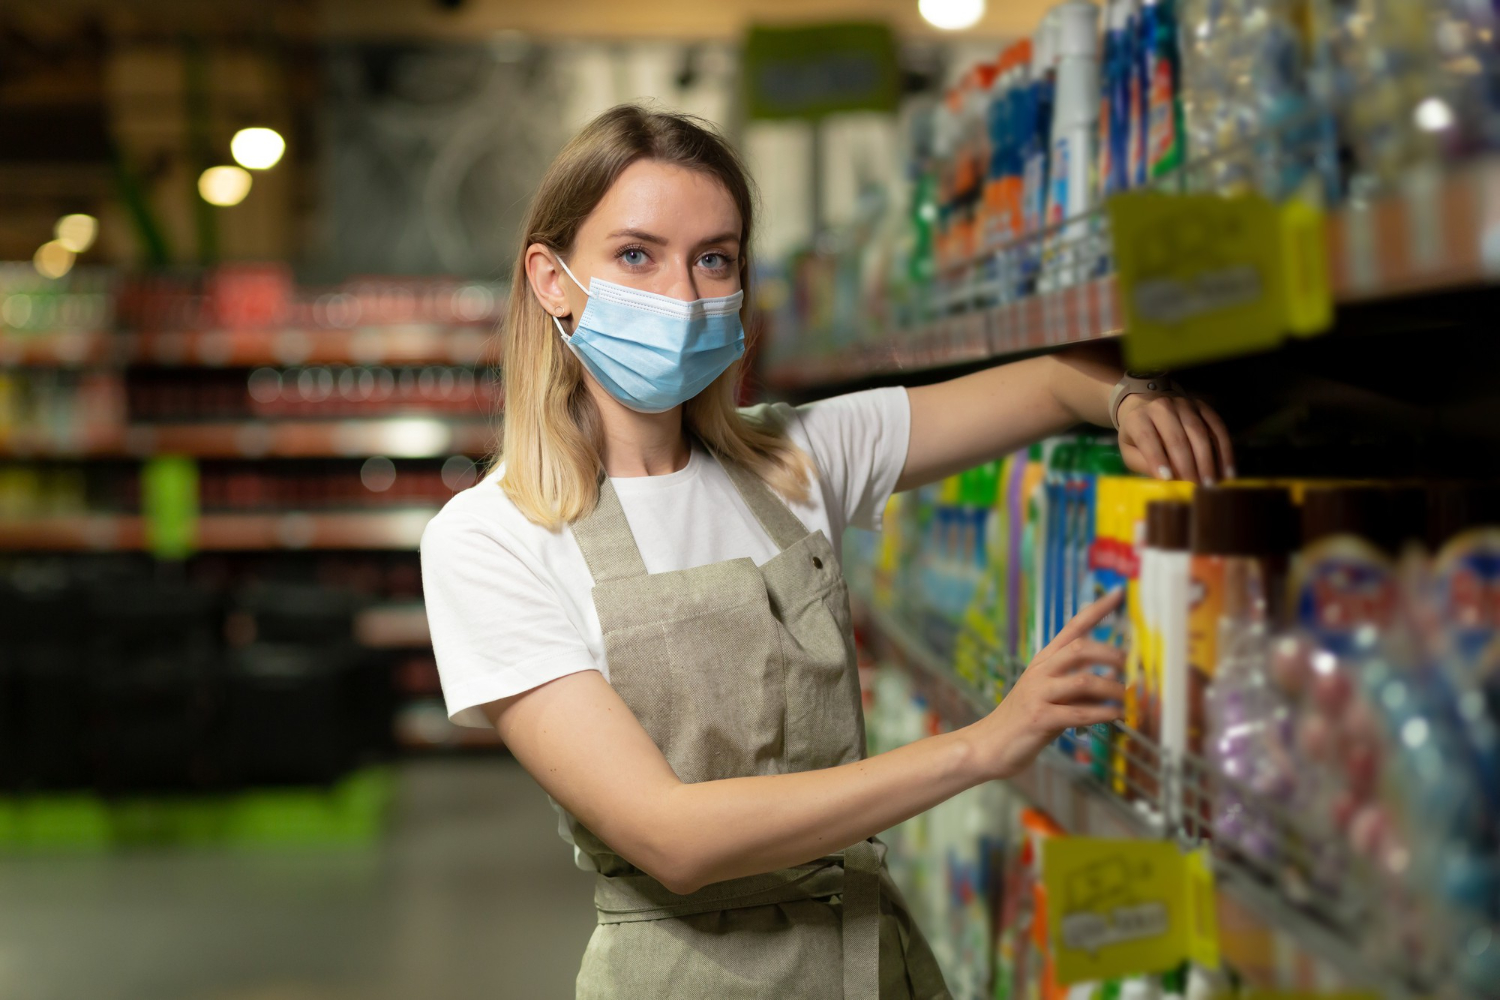 woolworths staff member in protective face mask filling shelves in the supermarket